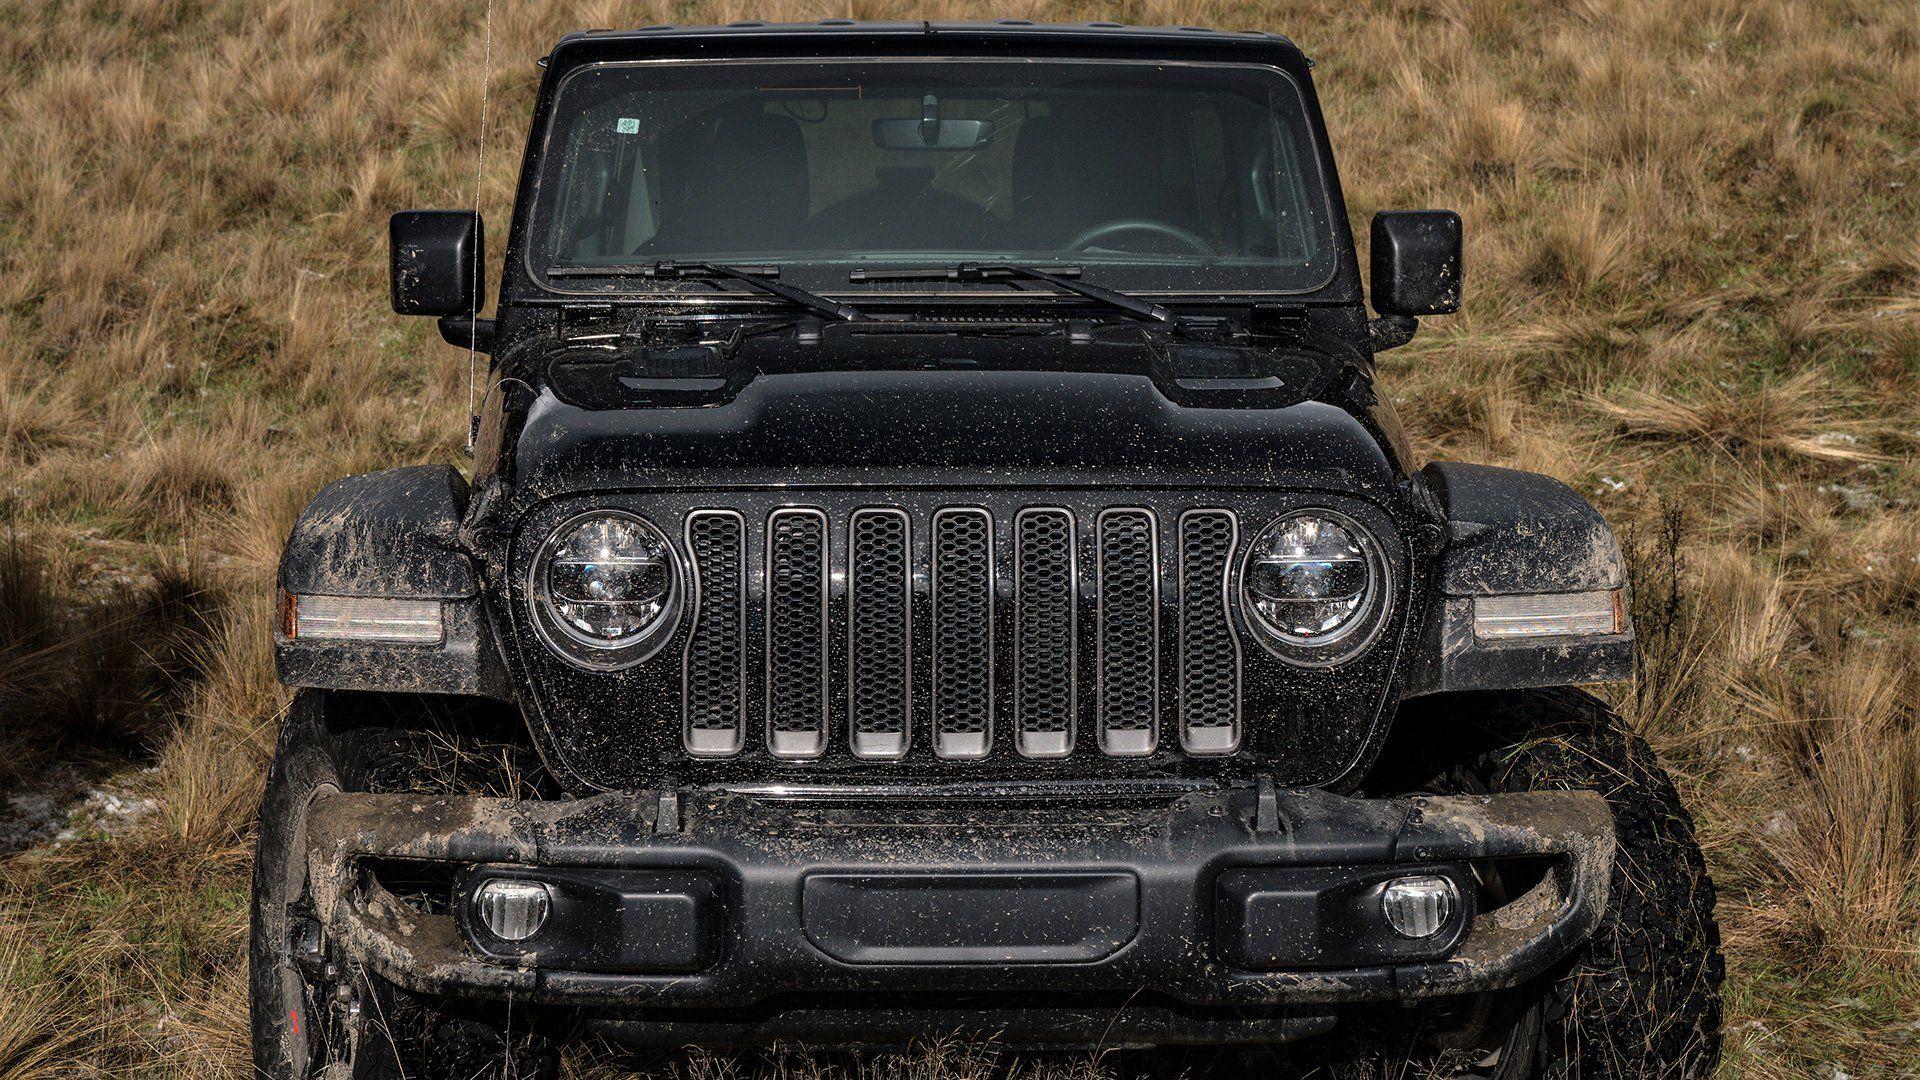 Jeep Wrangler First Drive Review: All New Wrangler Sets